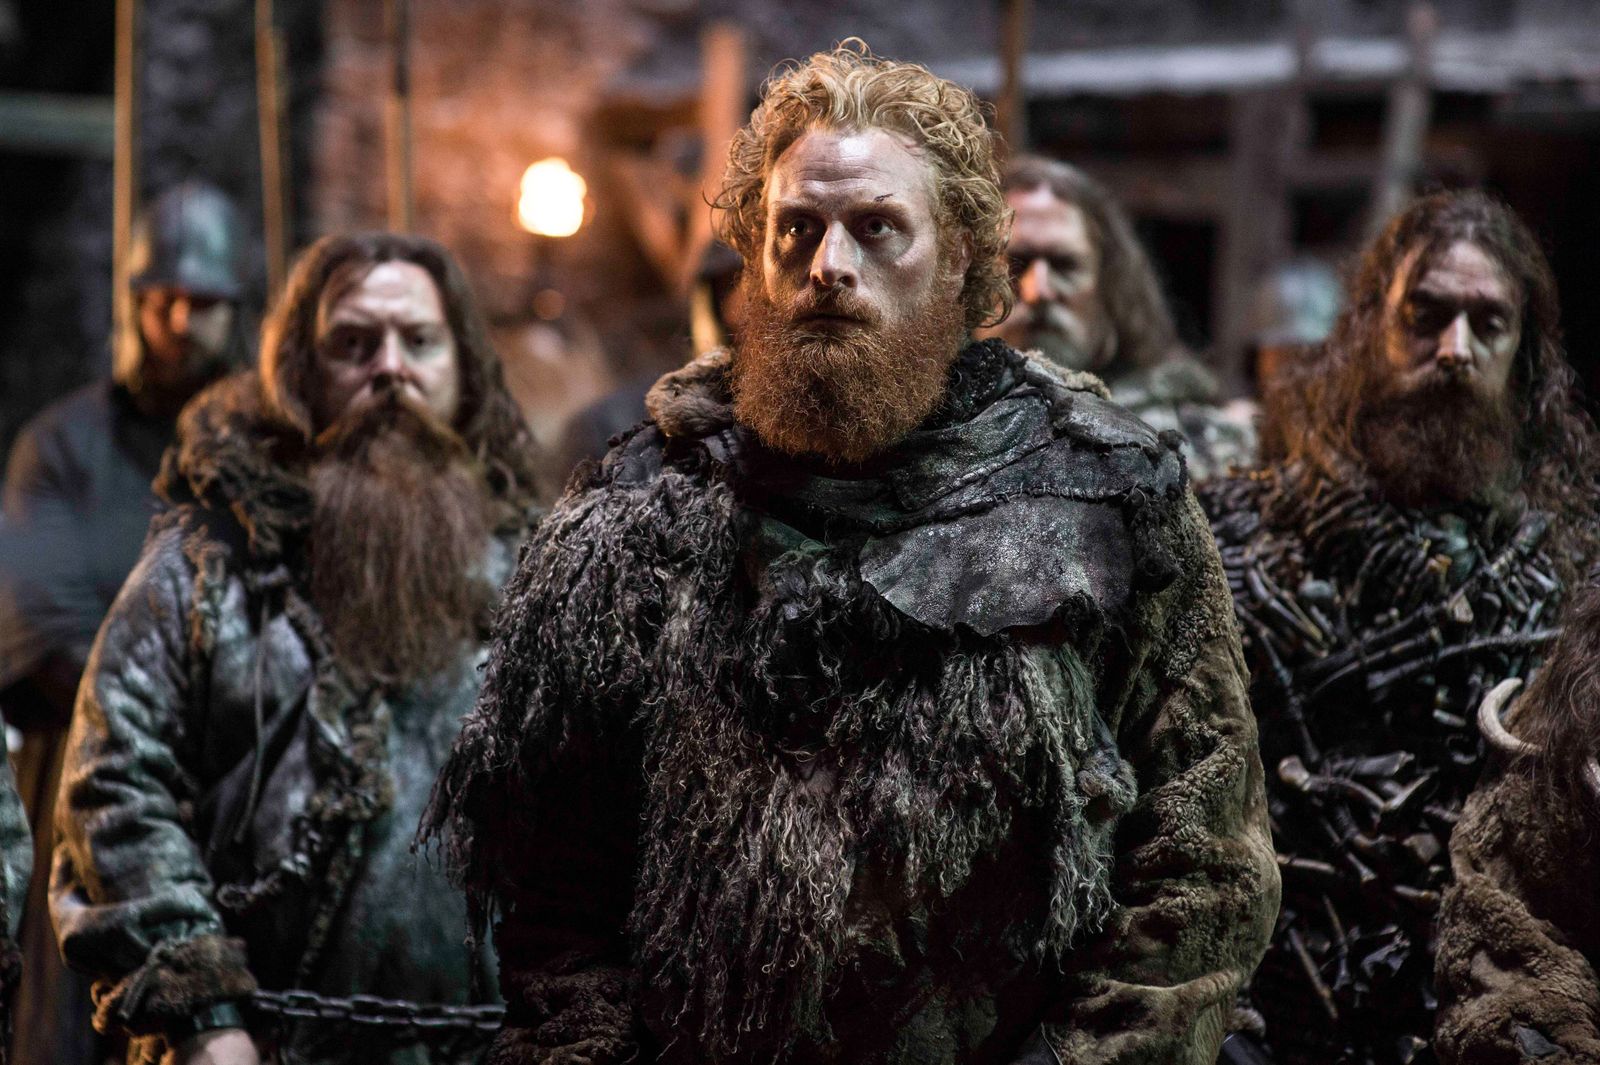 Games Of Thrones Cast Shot An Alternate Ending Reveals Kristofer Hivju, The Fans May Never Get To Know What It Is